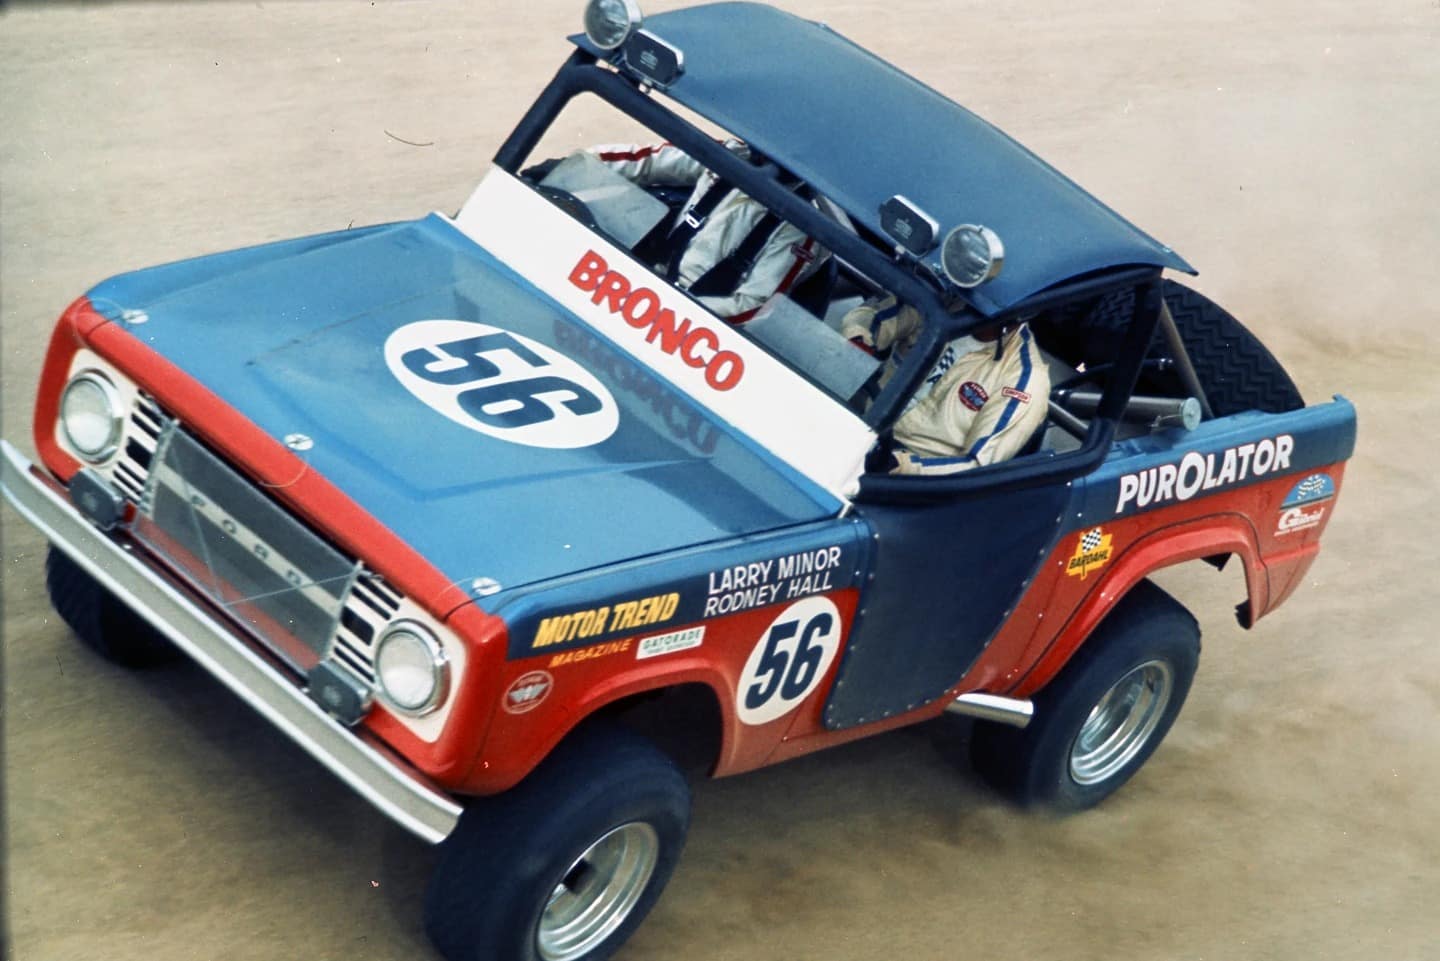 The legendary racing Ford Bronco driven by Larry Minor and Rodney Hall to an overall victory in the 1969 Mexican 1000 race.